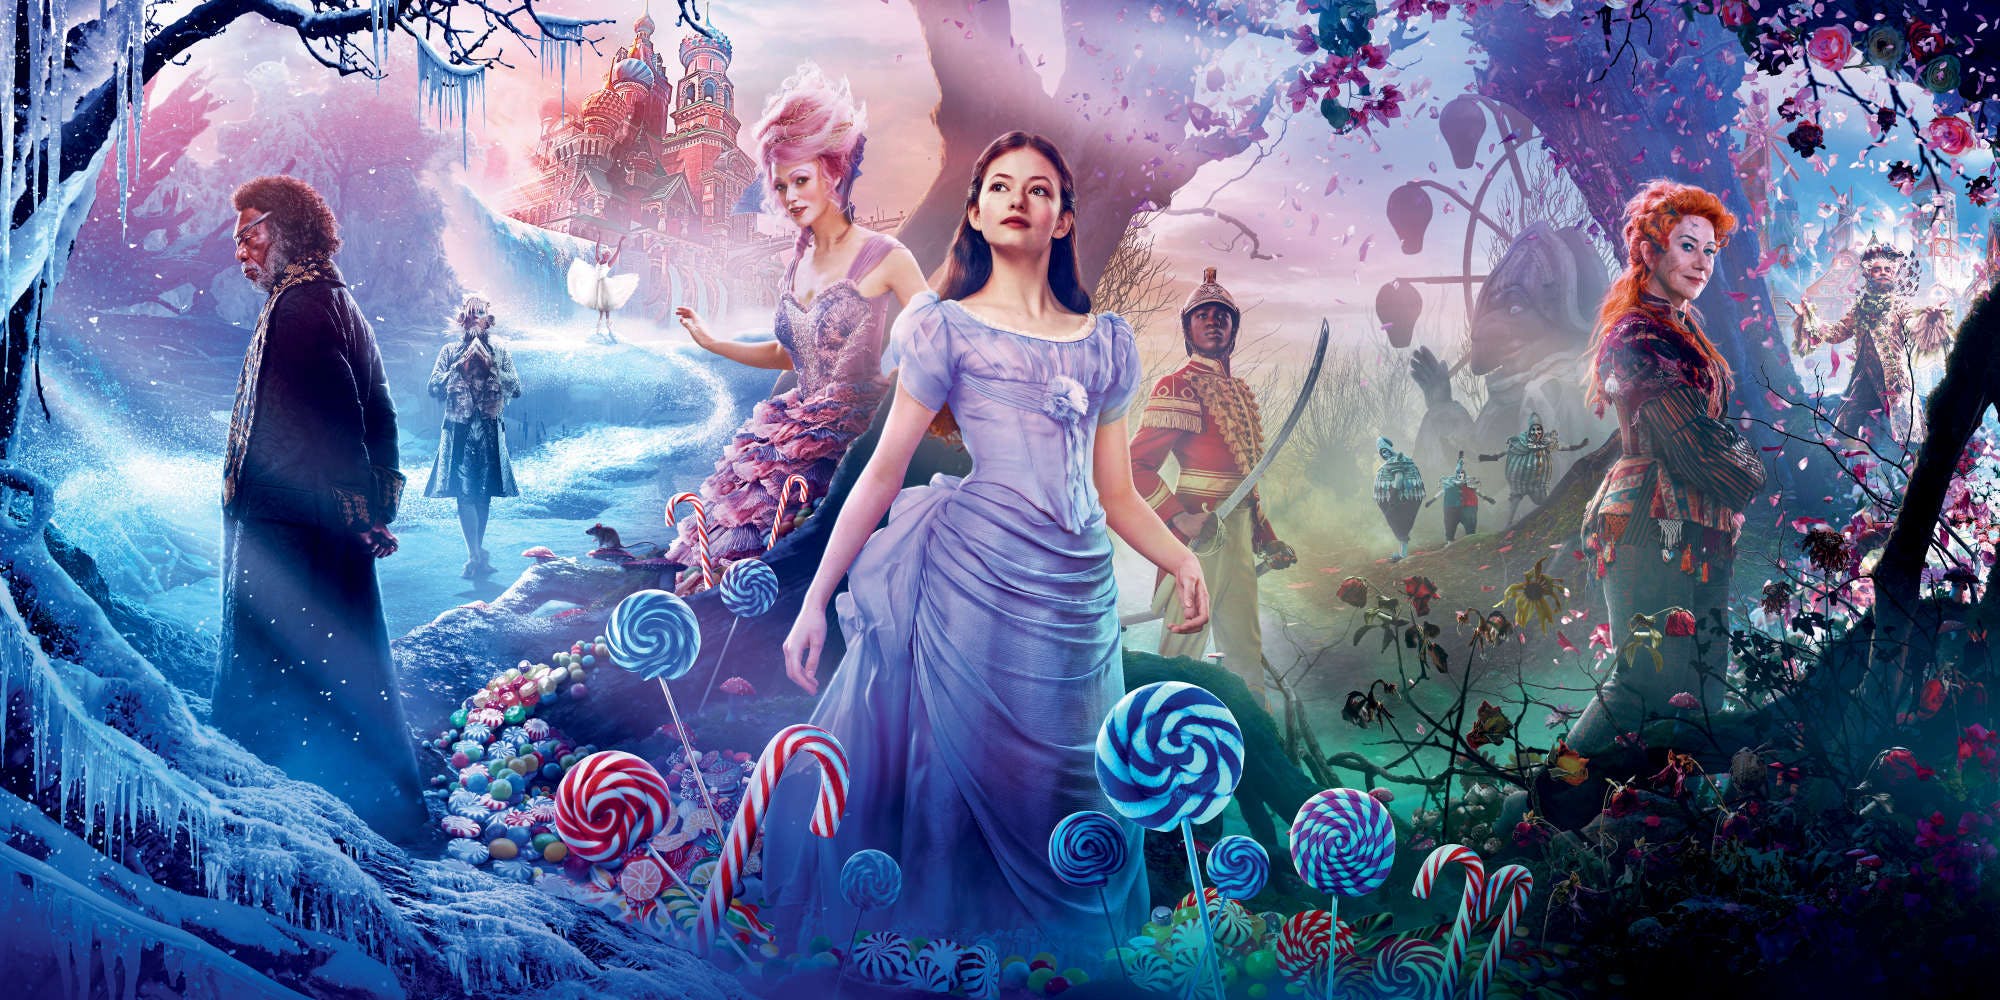 The Nutcracker and the Four Realms Review: A beautiful but messy film